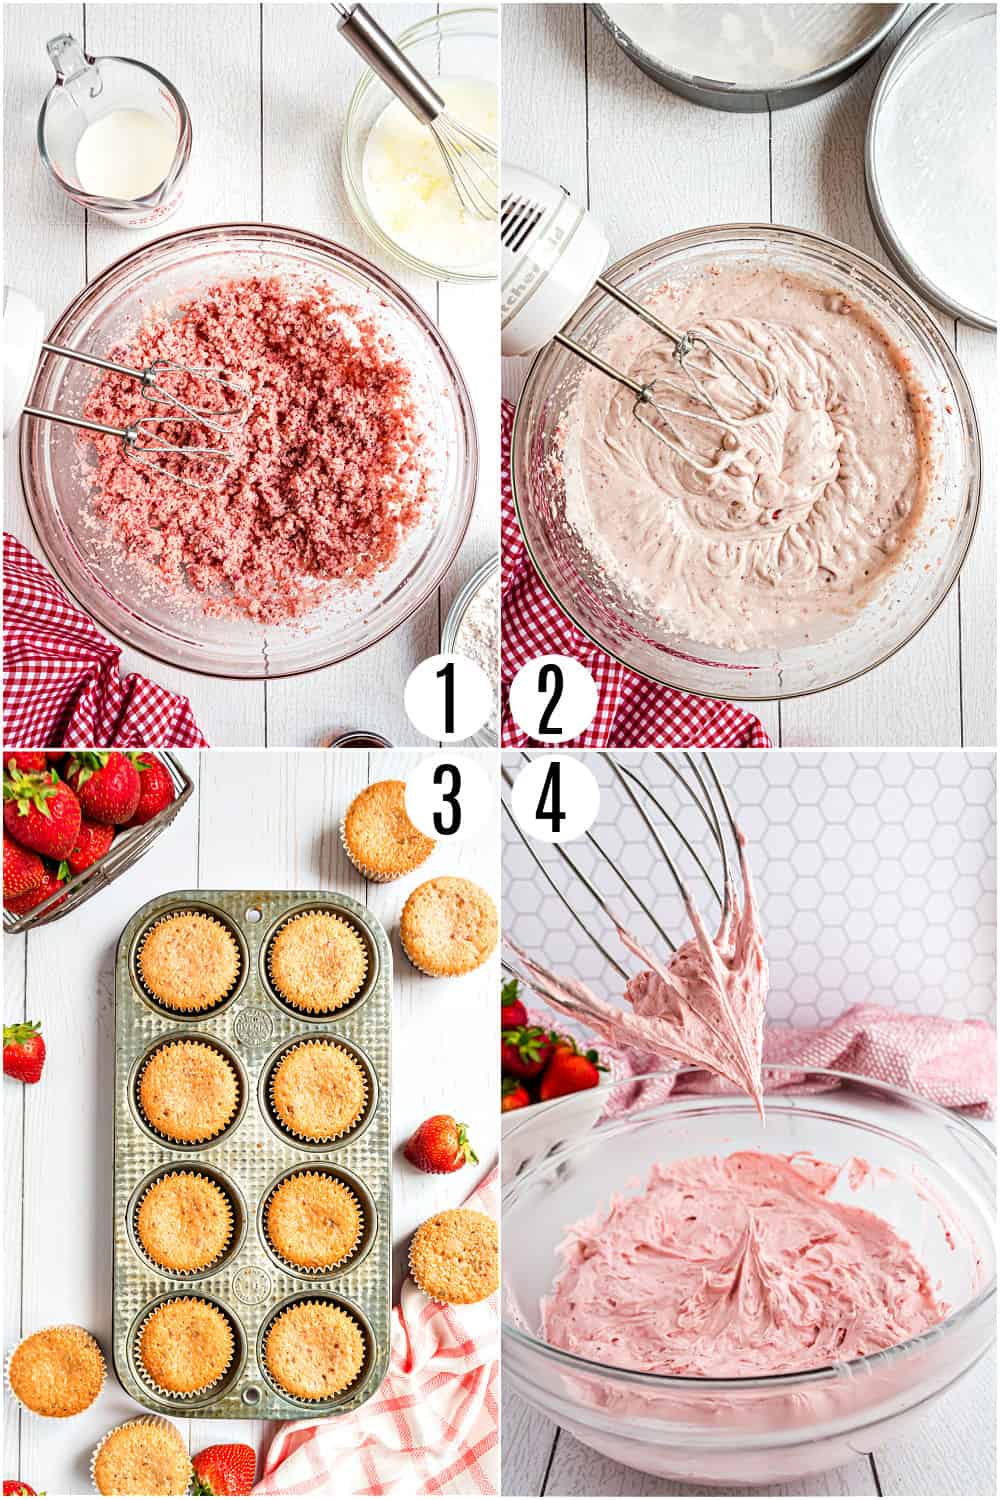 Step by step photos showing how to make strawberry cupcakes.